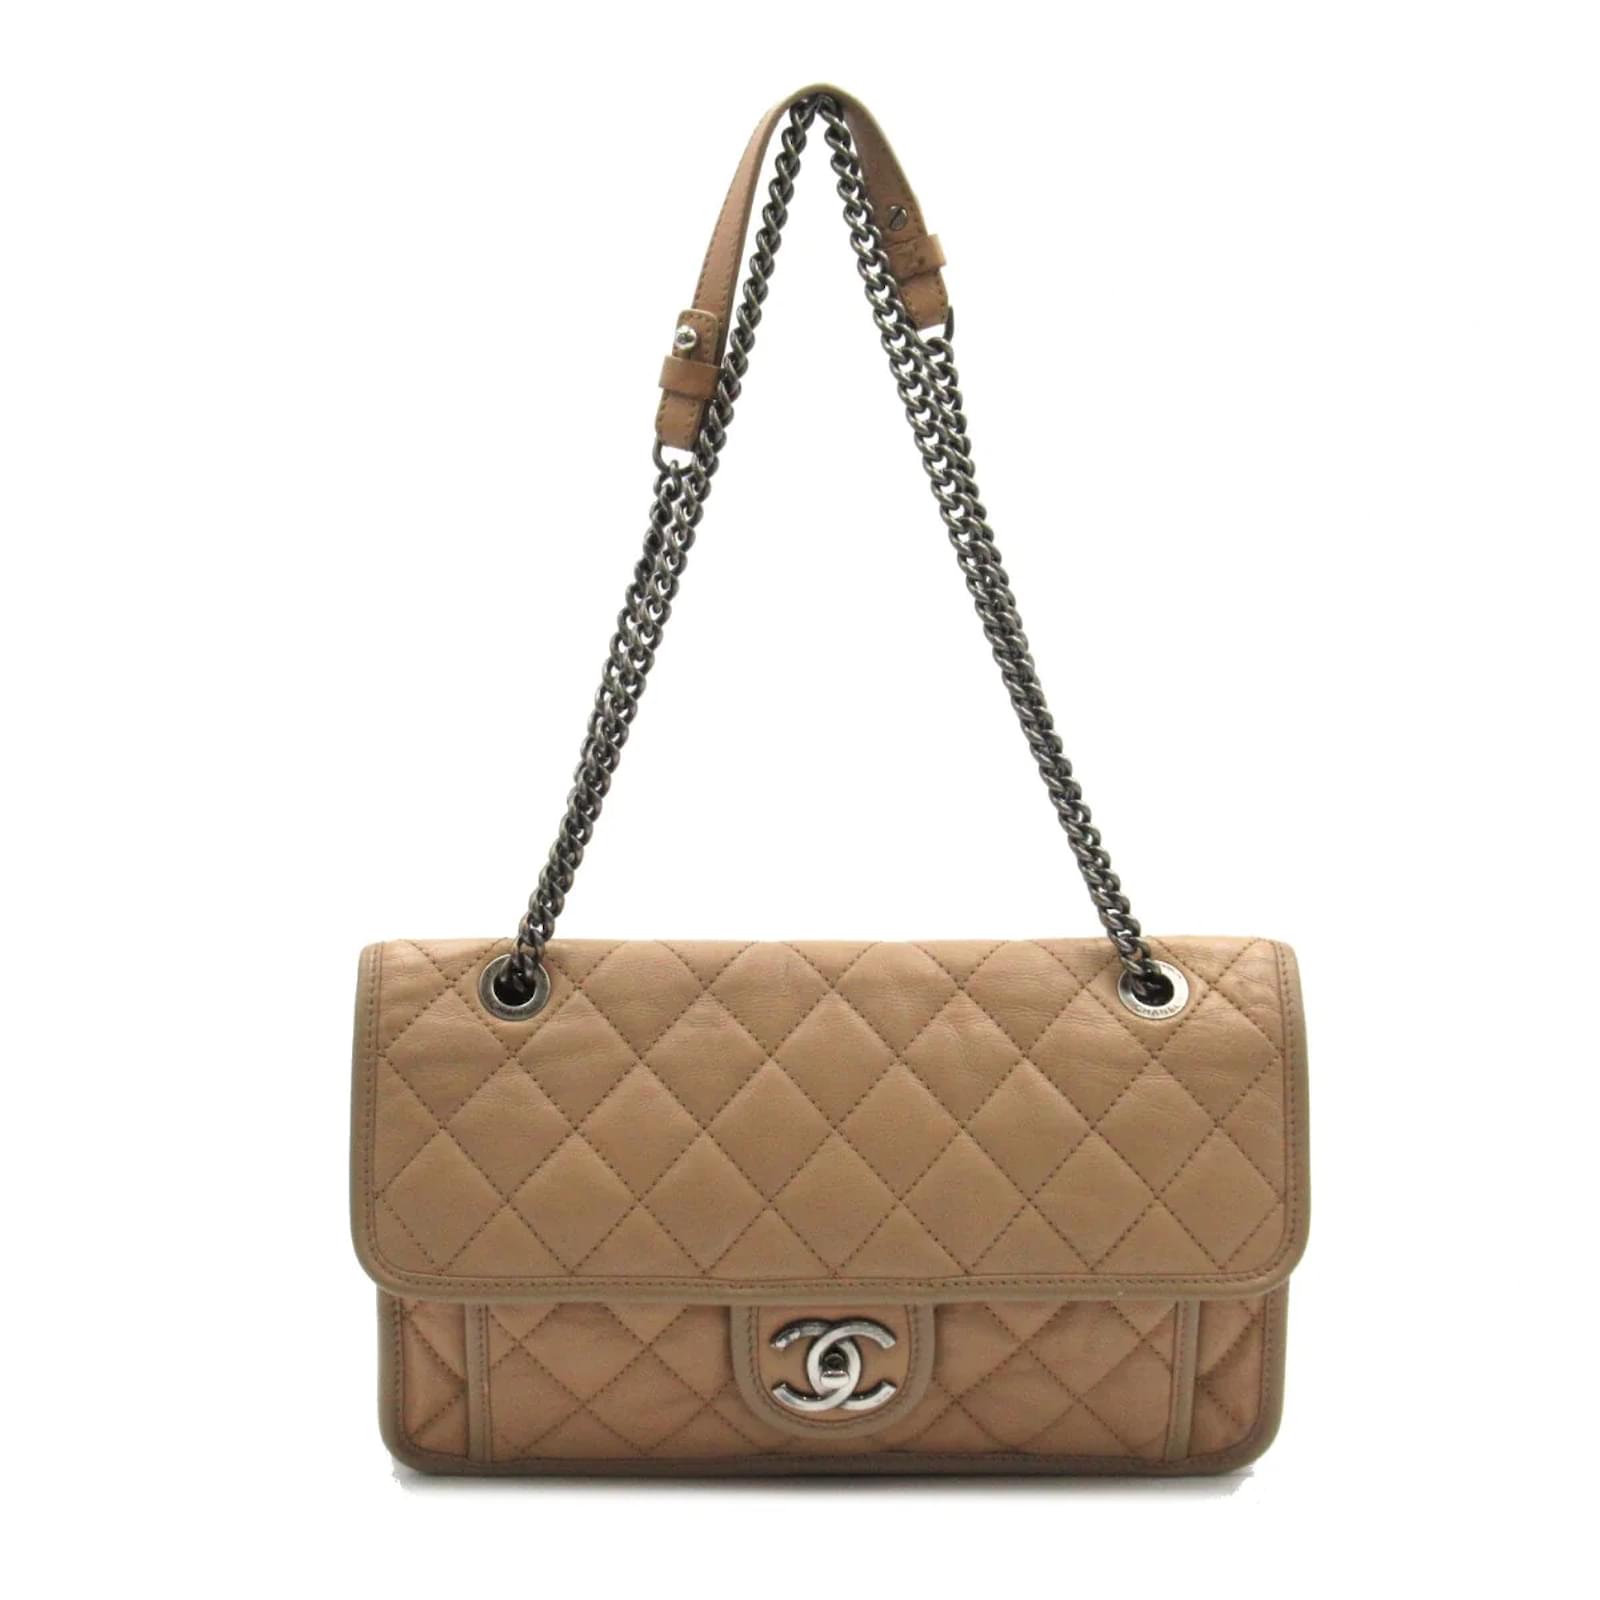 Chanel CC Quilted Leather French Riviera Flap Bag Beige Lambskin ref ...